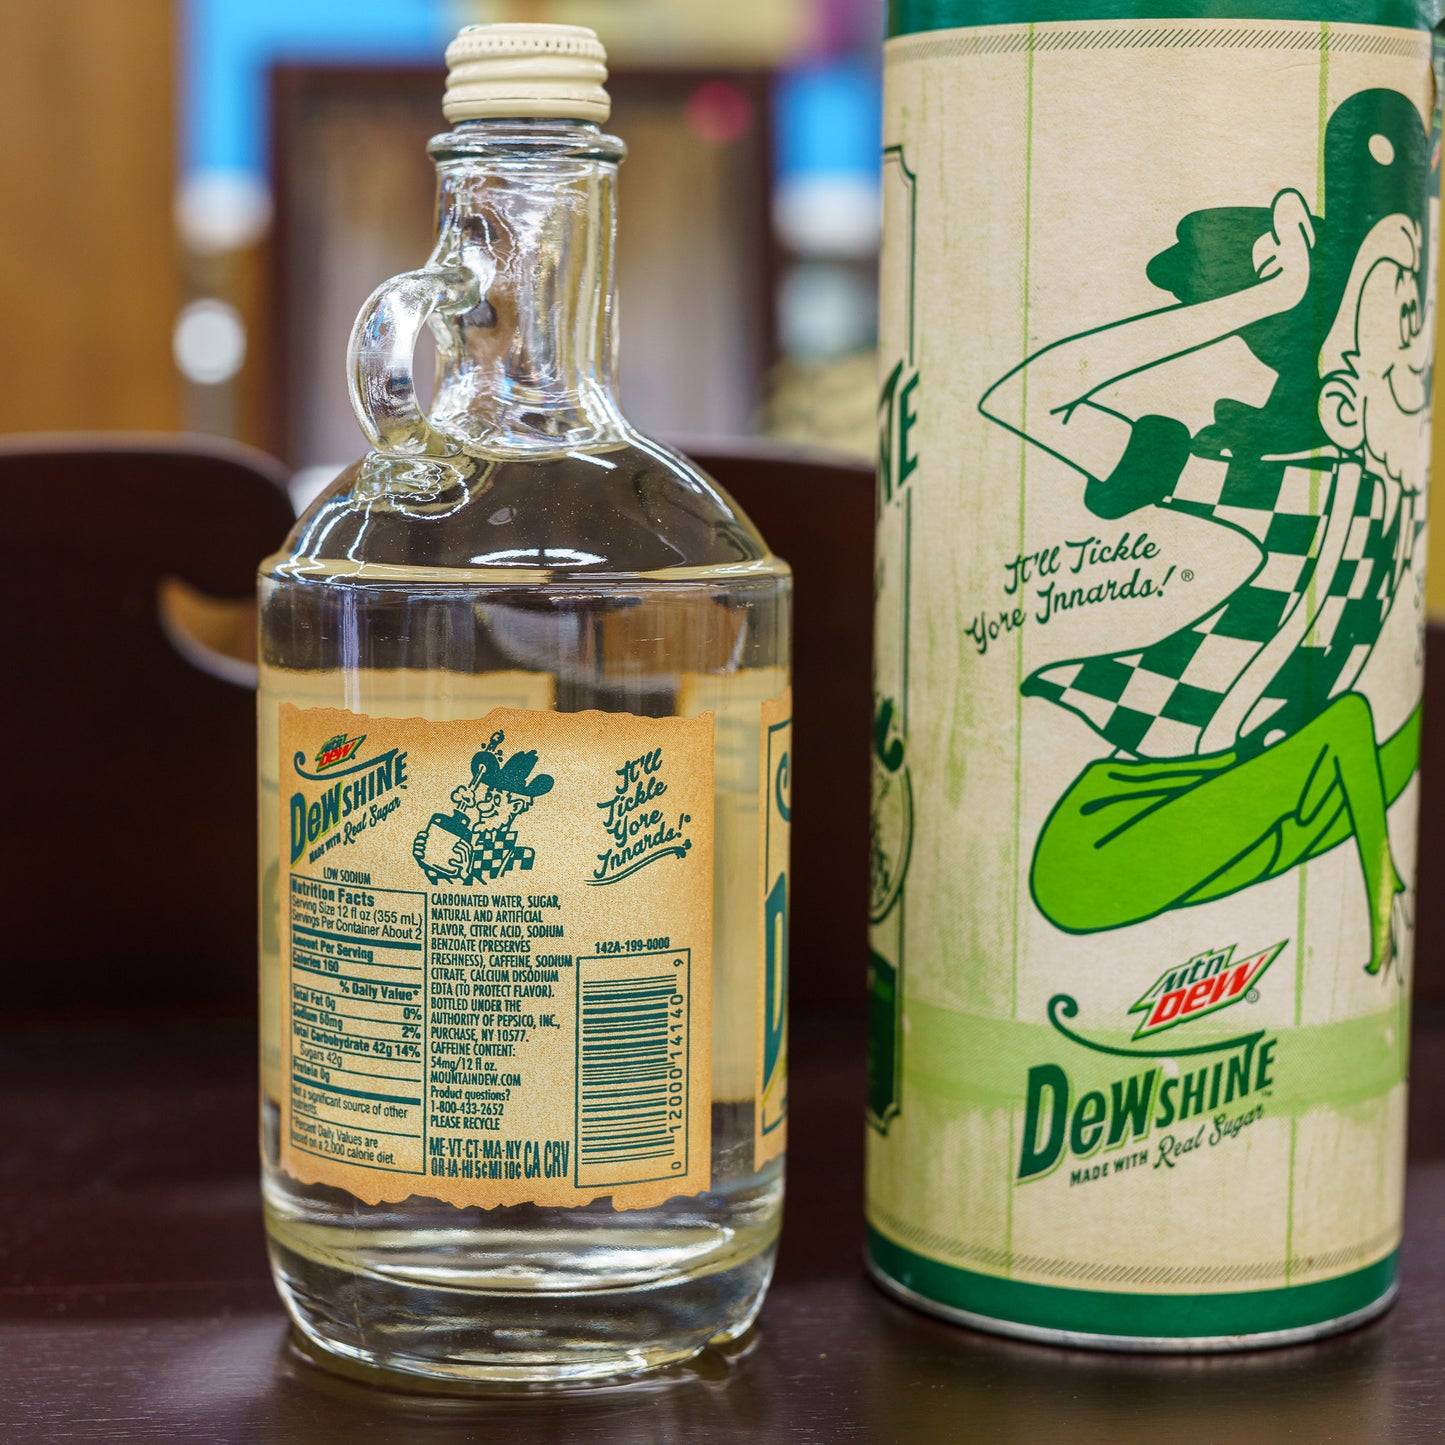 Limited Edition Mtn DEWshine 25 Fluid Ounce Collectible jug  and canister